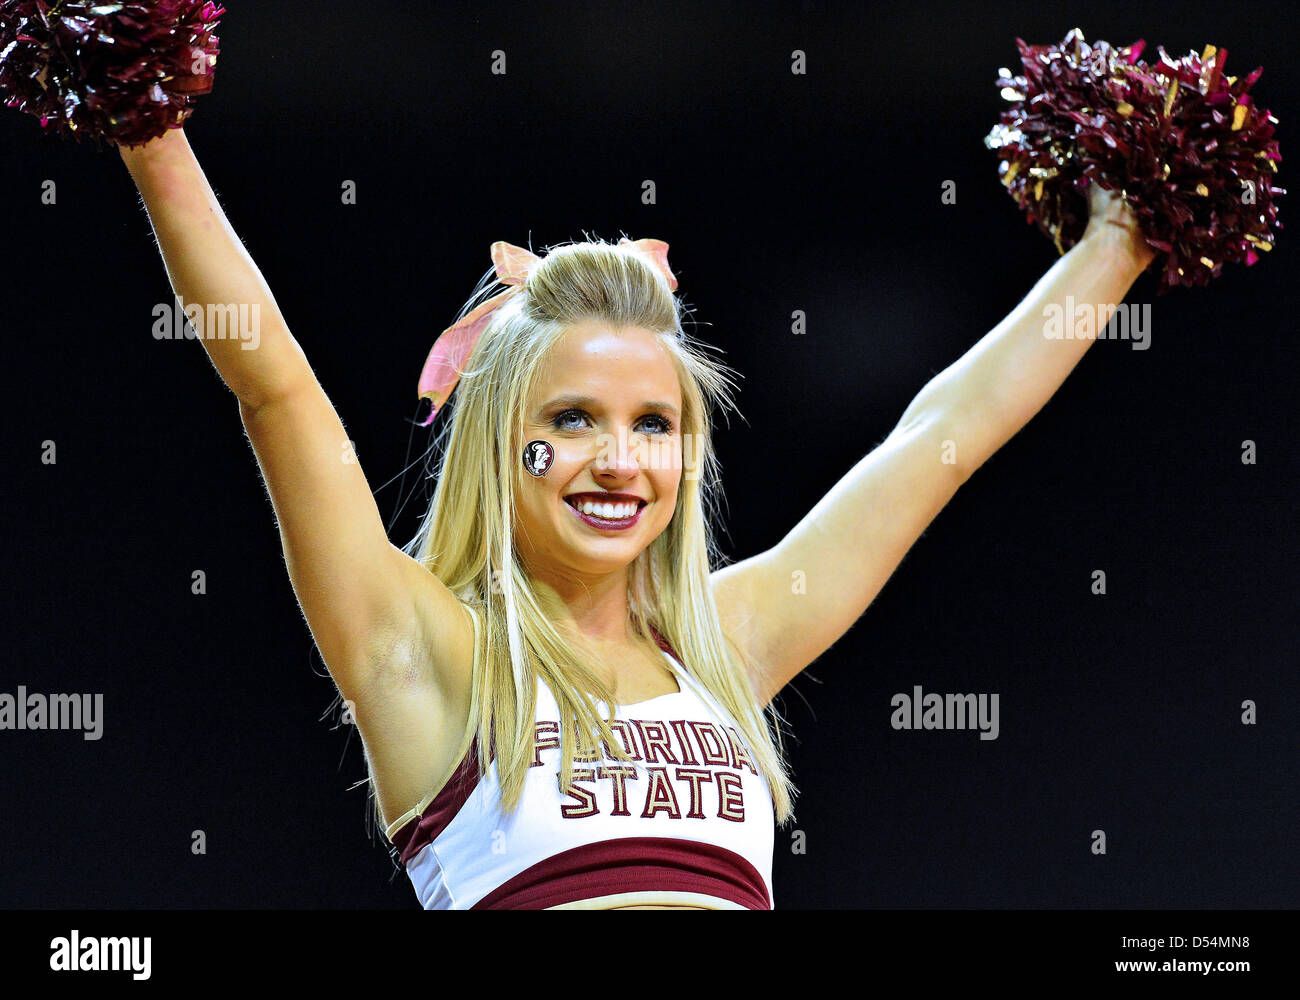 March 24, 2013 - Waco, TX, U.S - March 24, 2013..Florida State cheerleader during first round of NCAA Women's Basketball regional tournament at Ferrell Center in Waco, TX. Florida State defeat Princeton 60-44 to advance to the second round of the tournament. Stock Photo